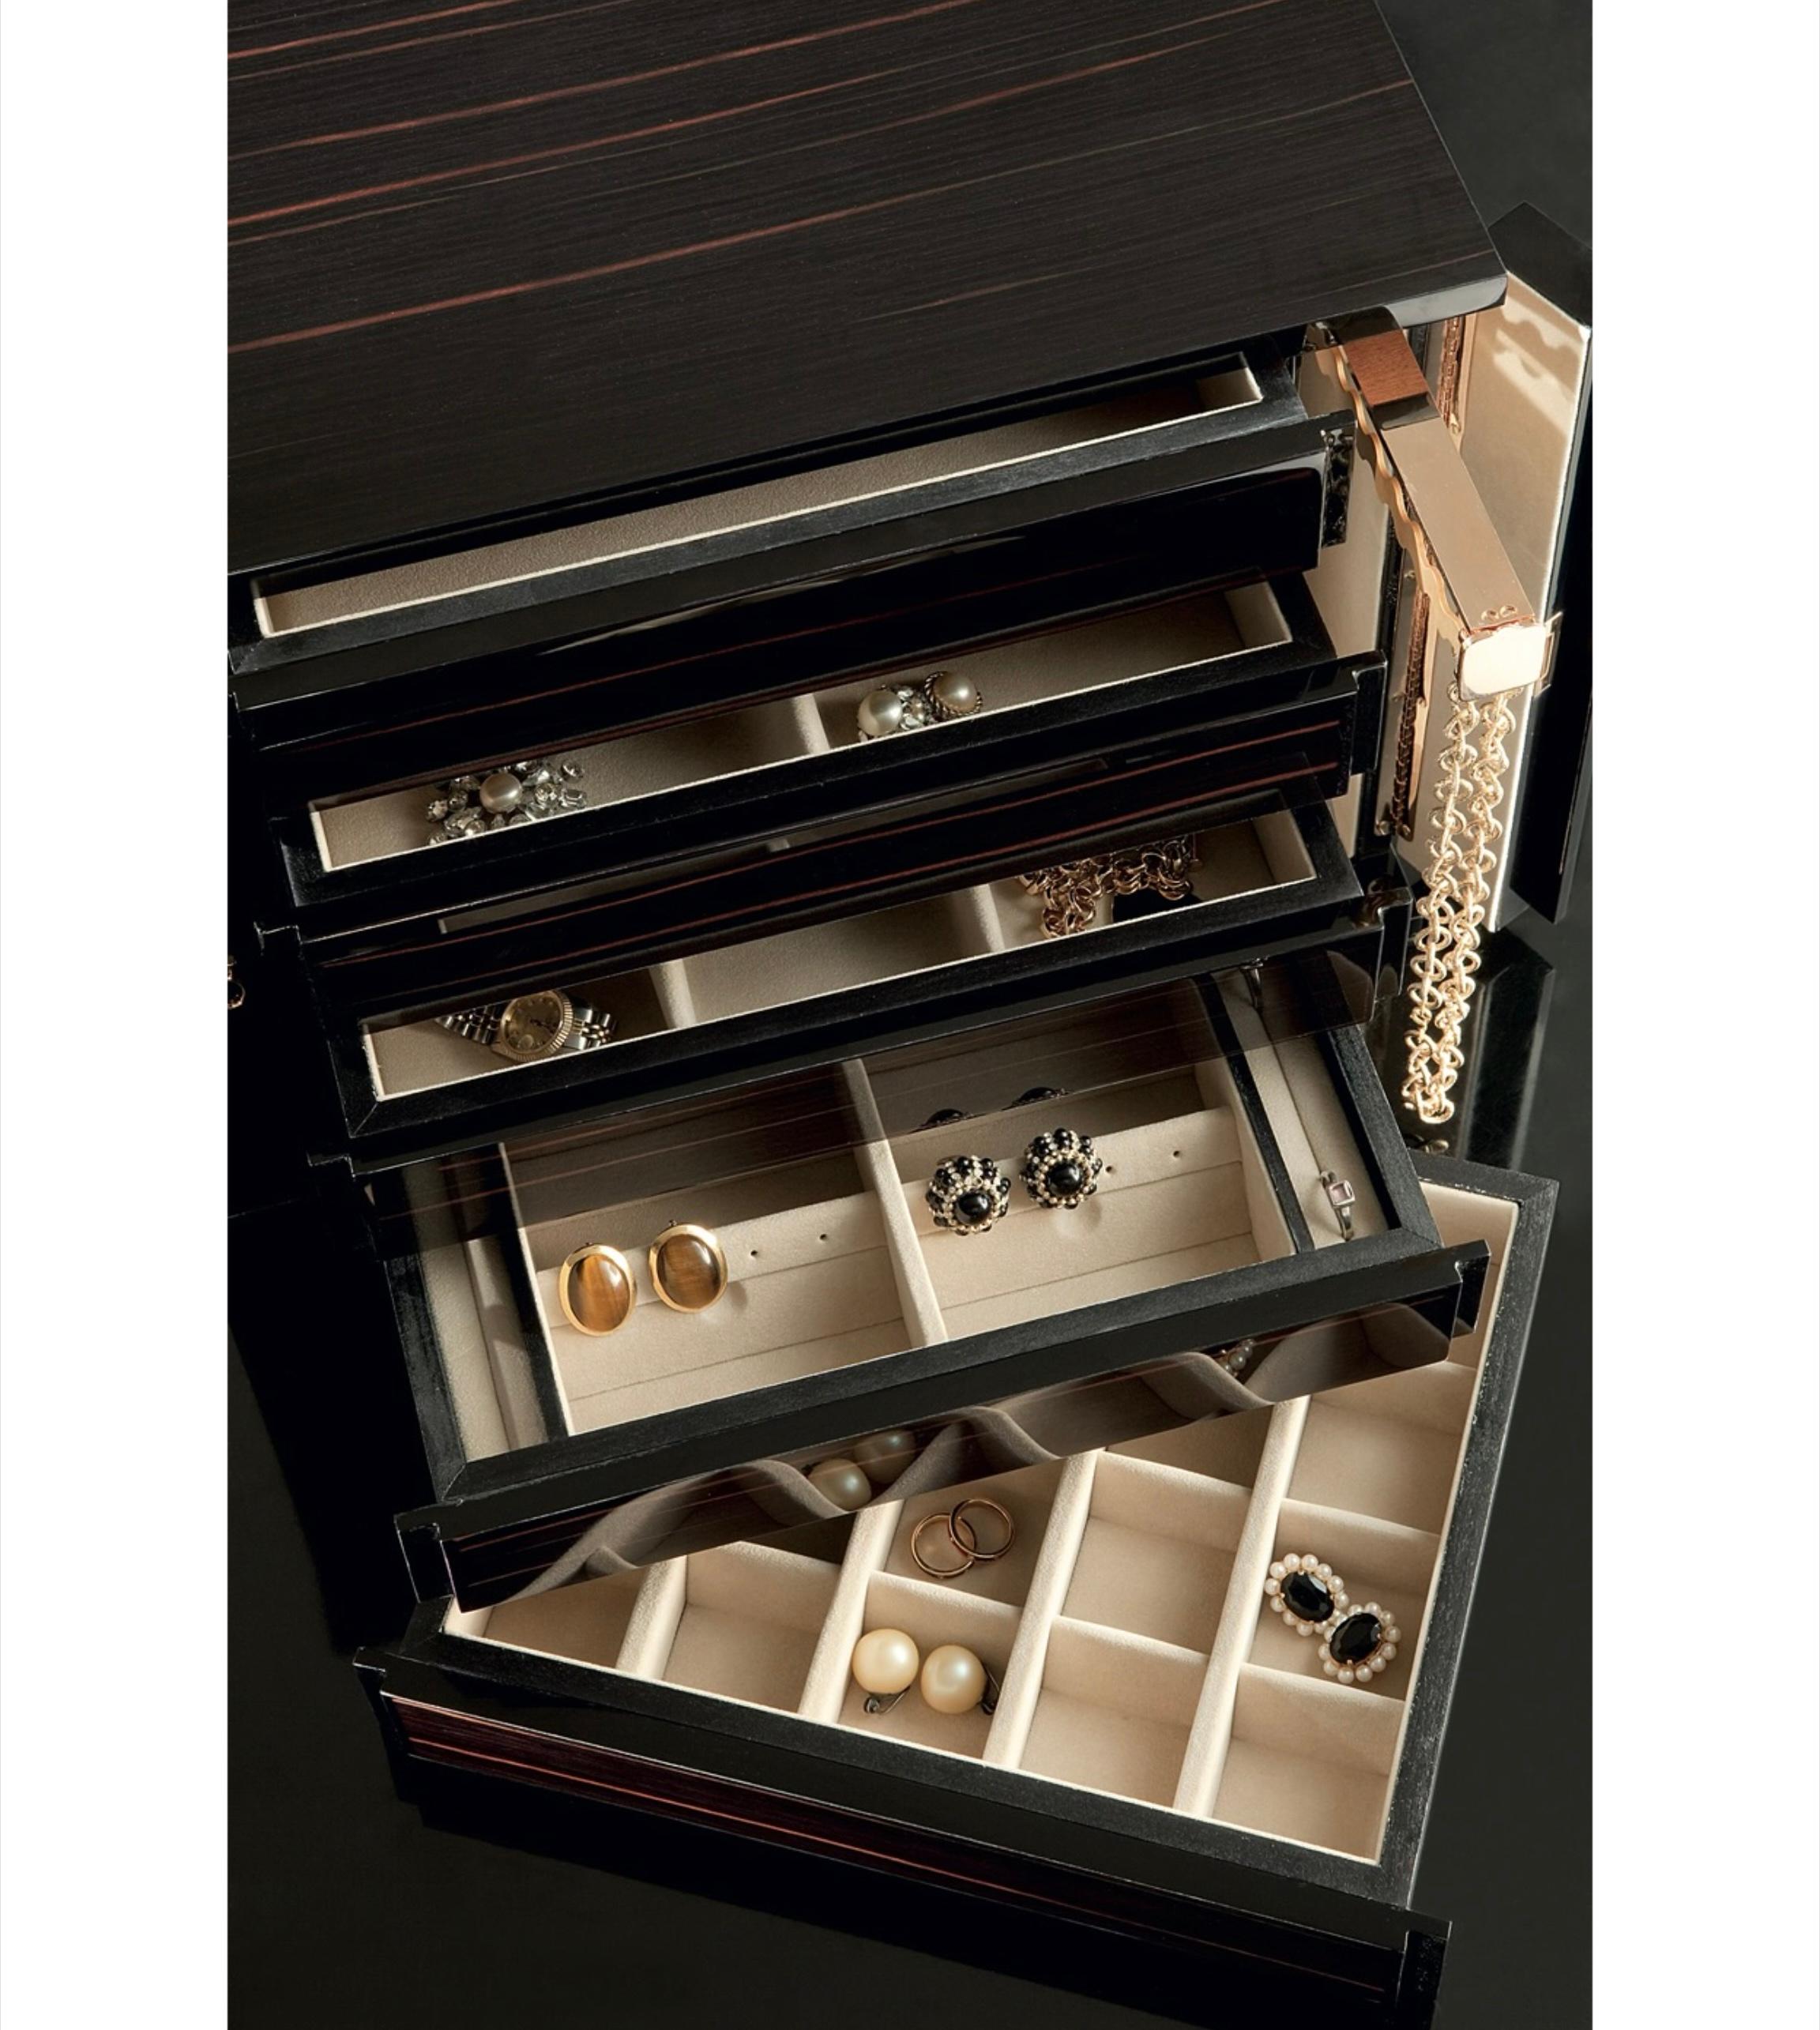 Modern Agresti Polished Black Jewel Chest with Gold-Plated Hardware For Sale